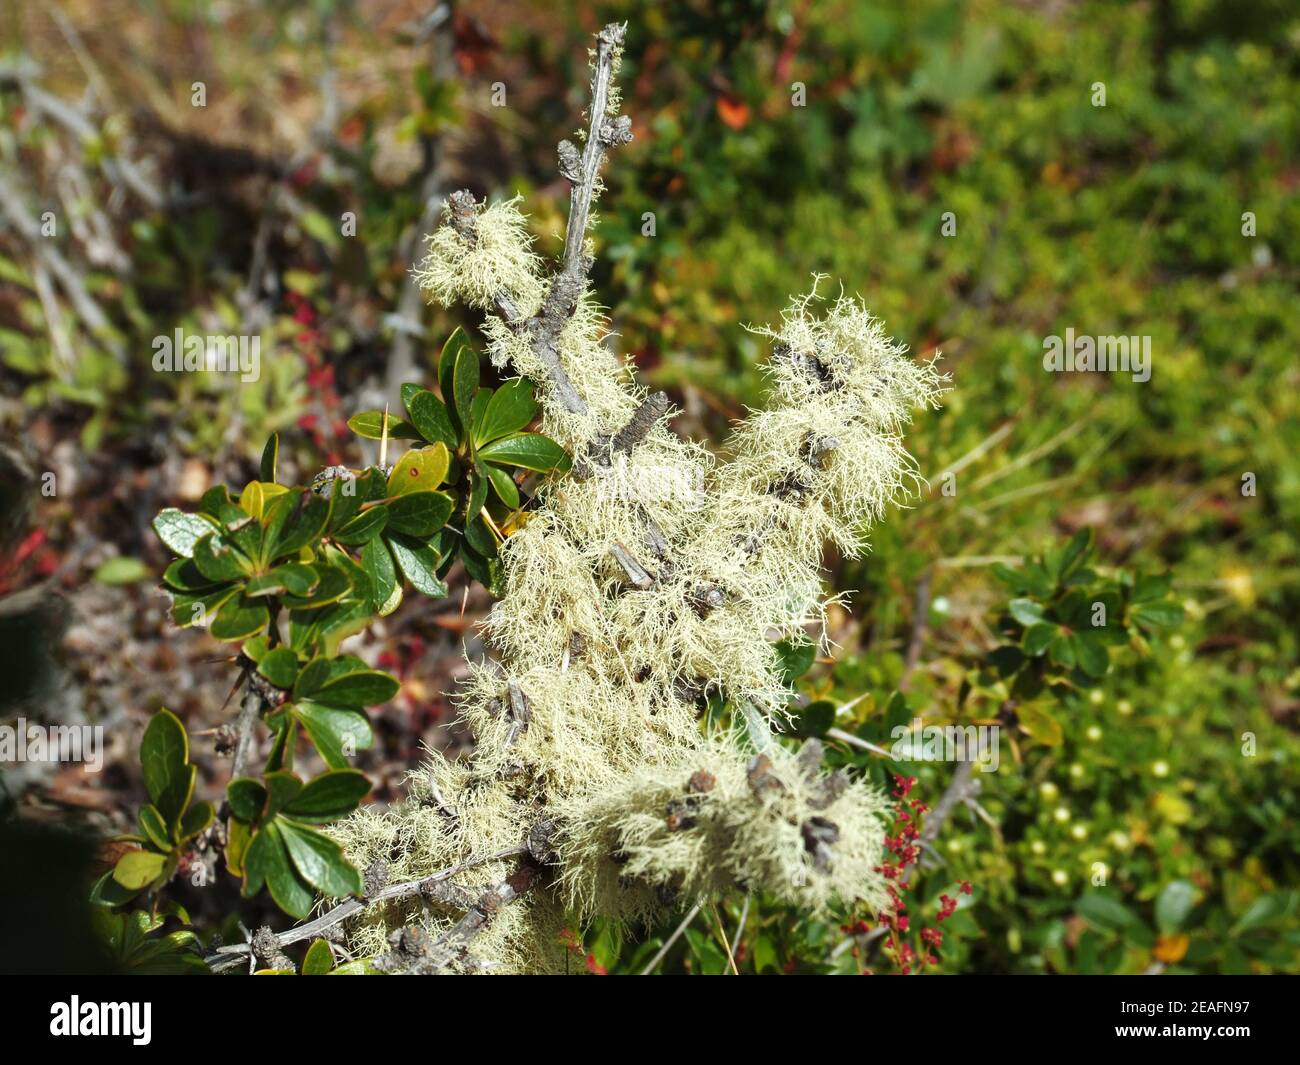 Lichen on branches in Tierra del Fuego National Park, Argentina  Stock Photo